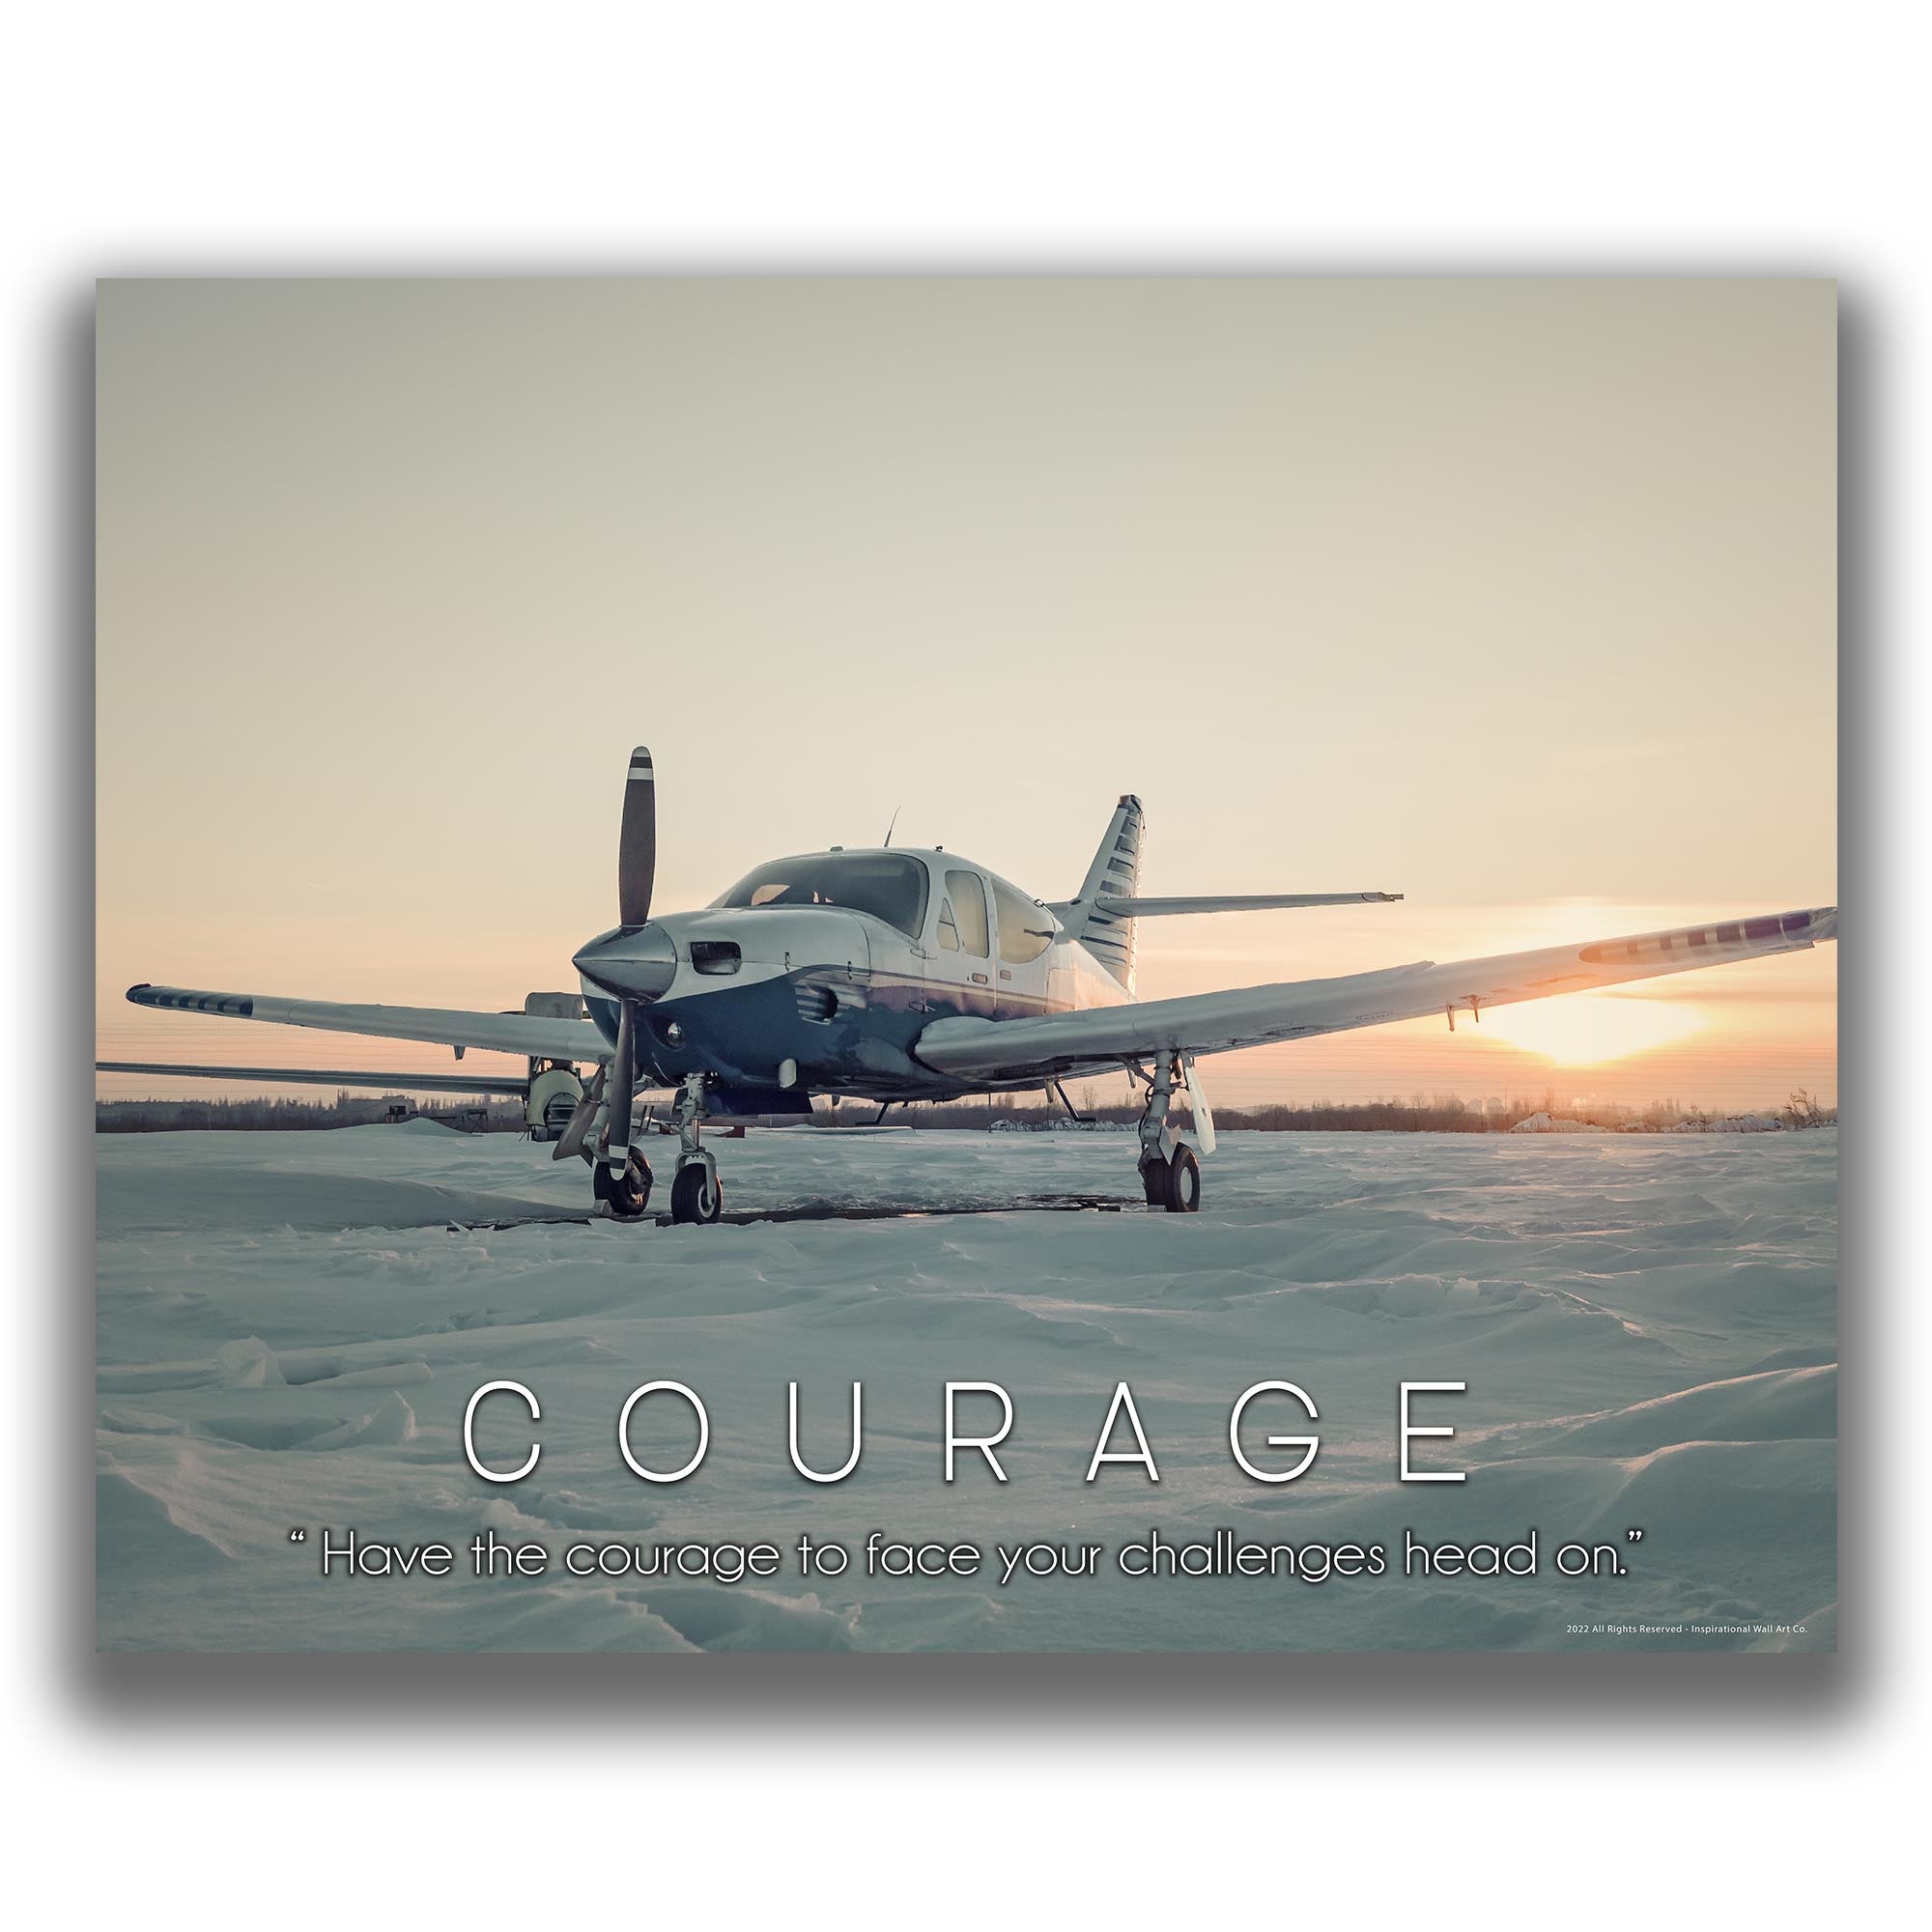 Courage - Airplane Poster